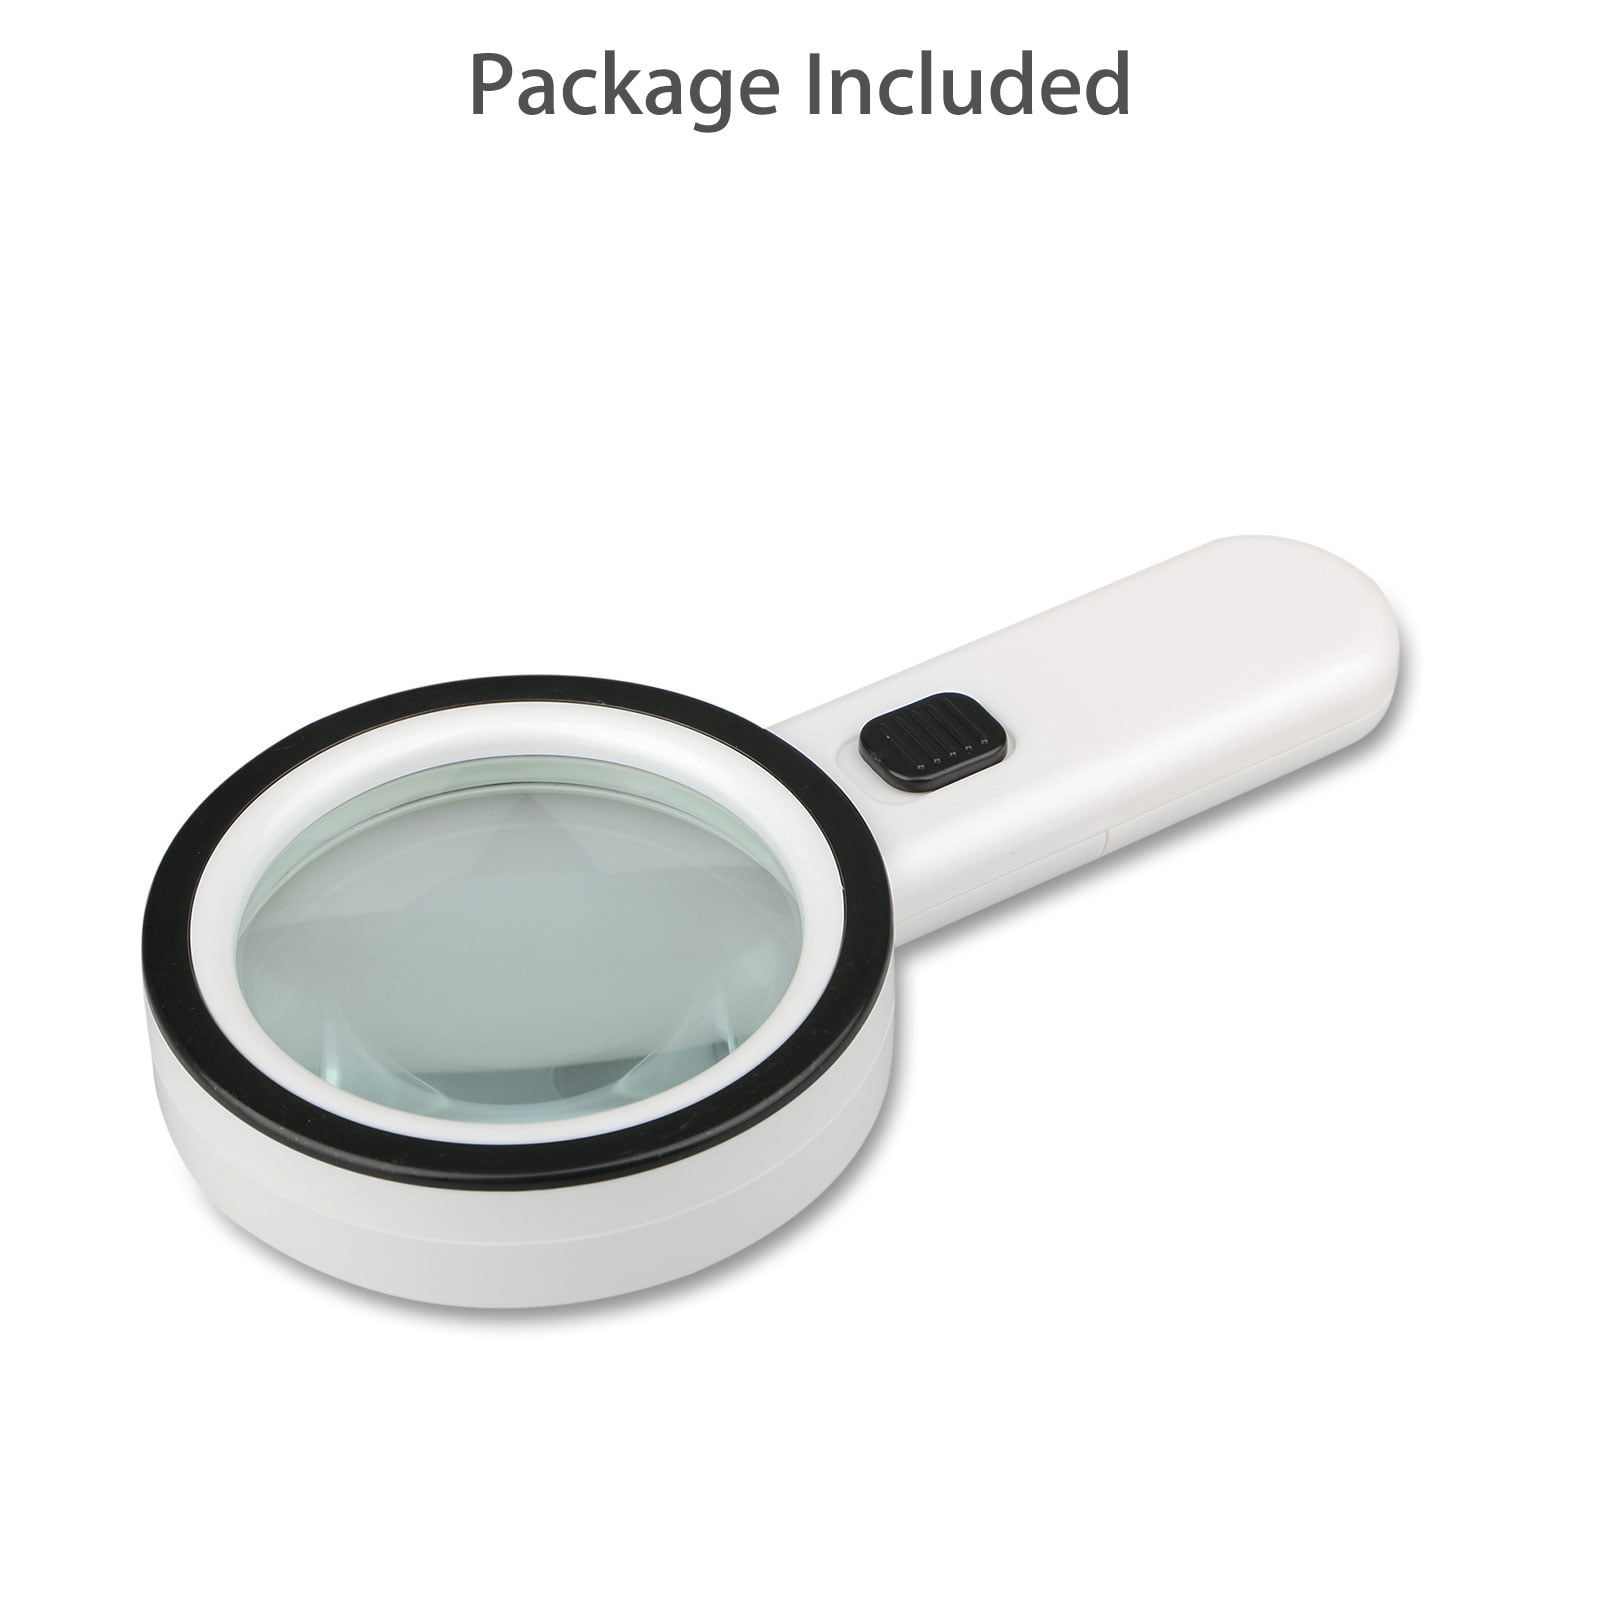  MOMFEI Magnifying Glass with Light, 30X Handheld Large